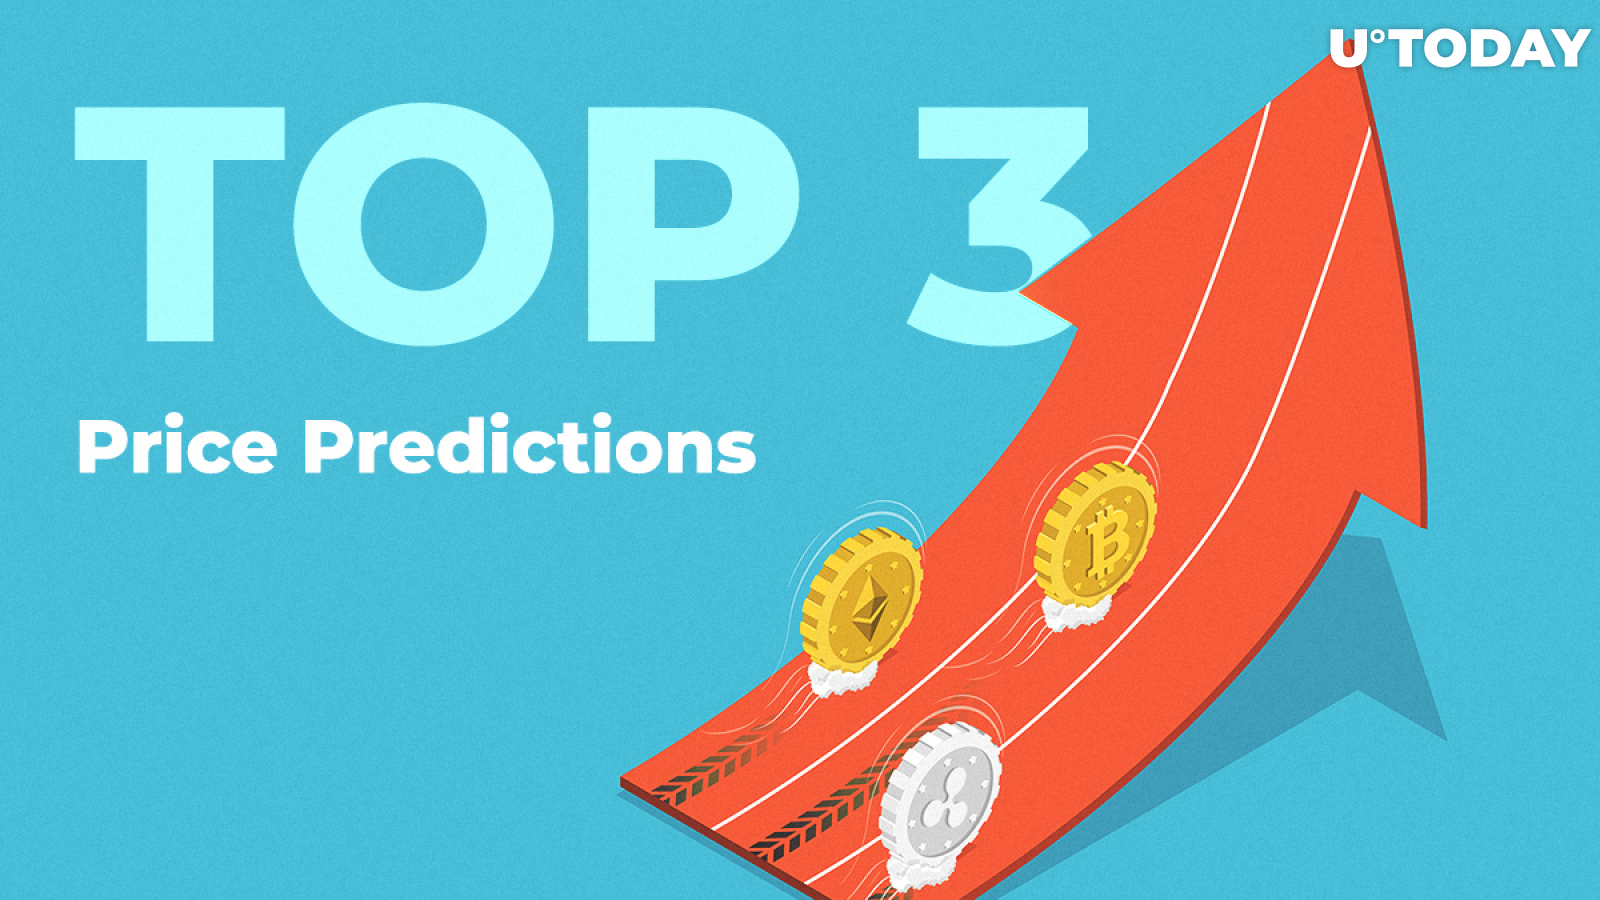 TOP 3 Price Predictions: BTC, ETH, XRP — Have Bulls Got Out From The Bears’ Trap?